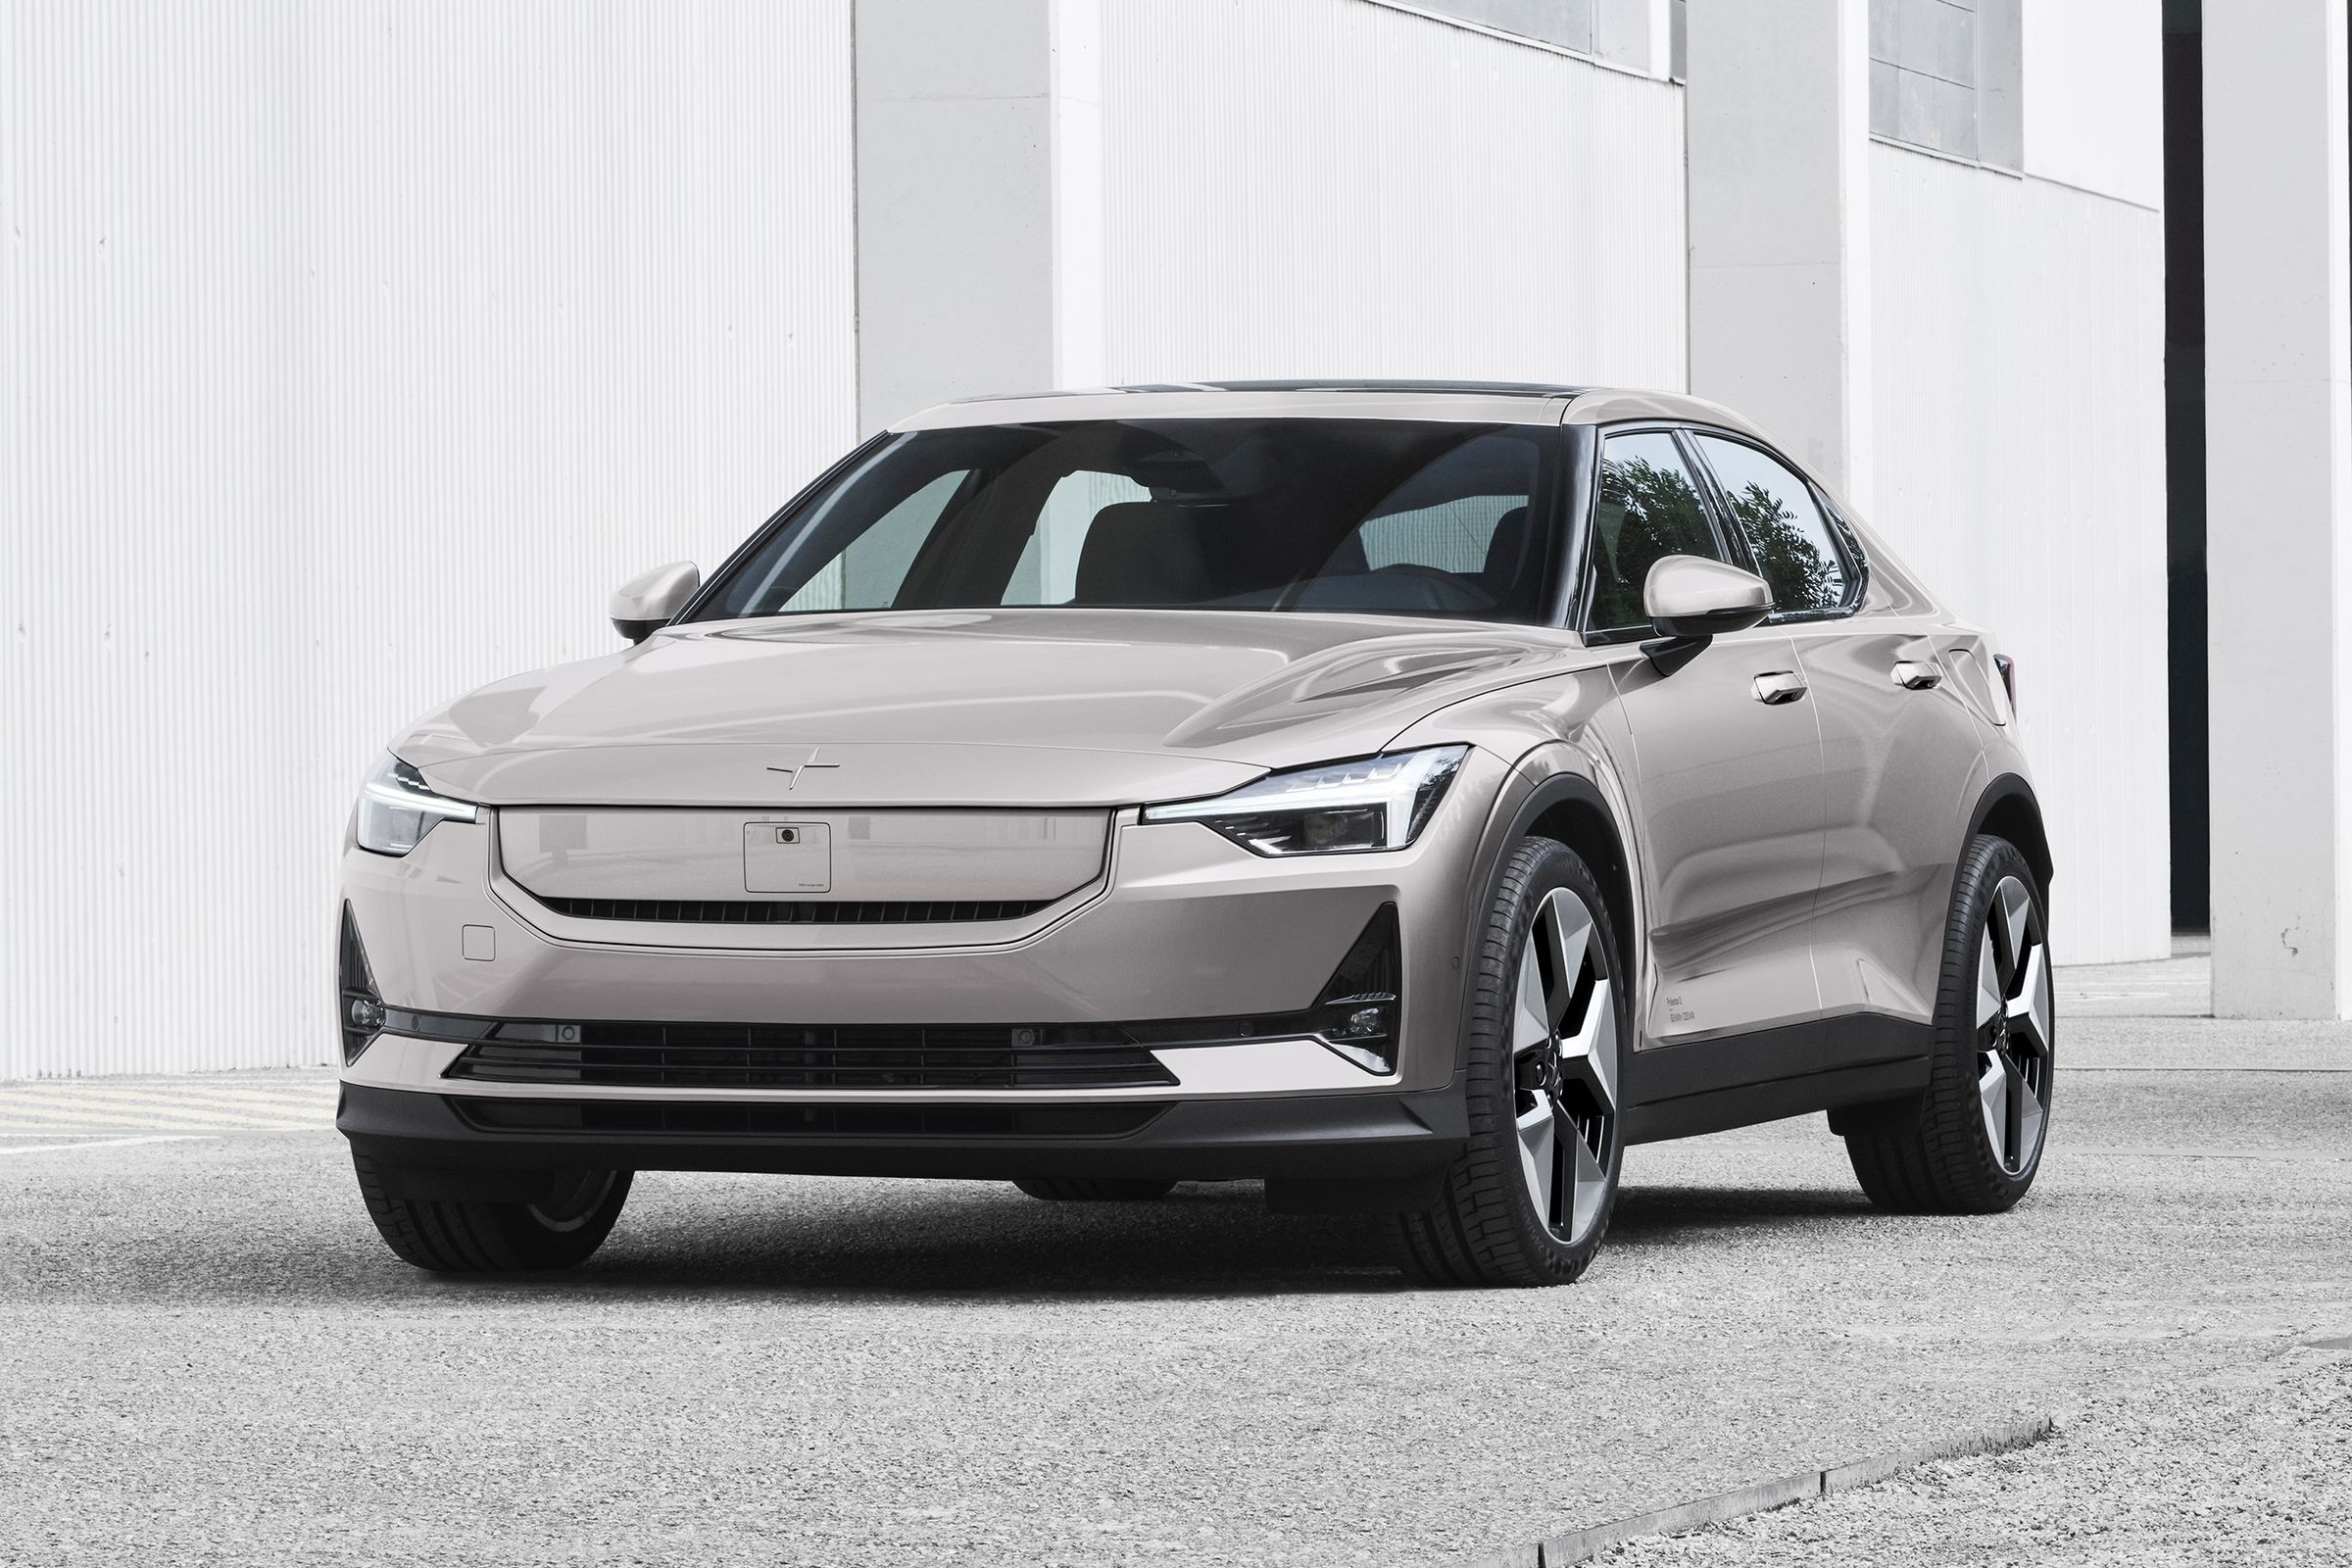 A silver- and beige-colored Polestar 2 is parked on concrete with a white building in the back. The front and driver’s side of the car are visible with a new front that has a body-colored panel covering the grille.